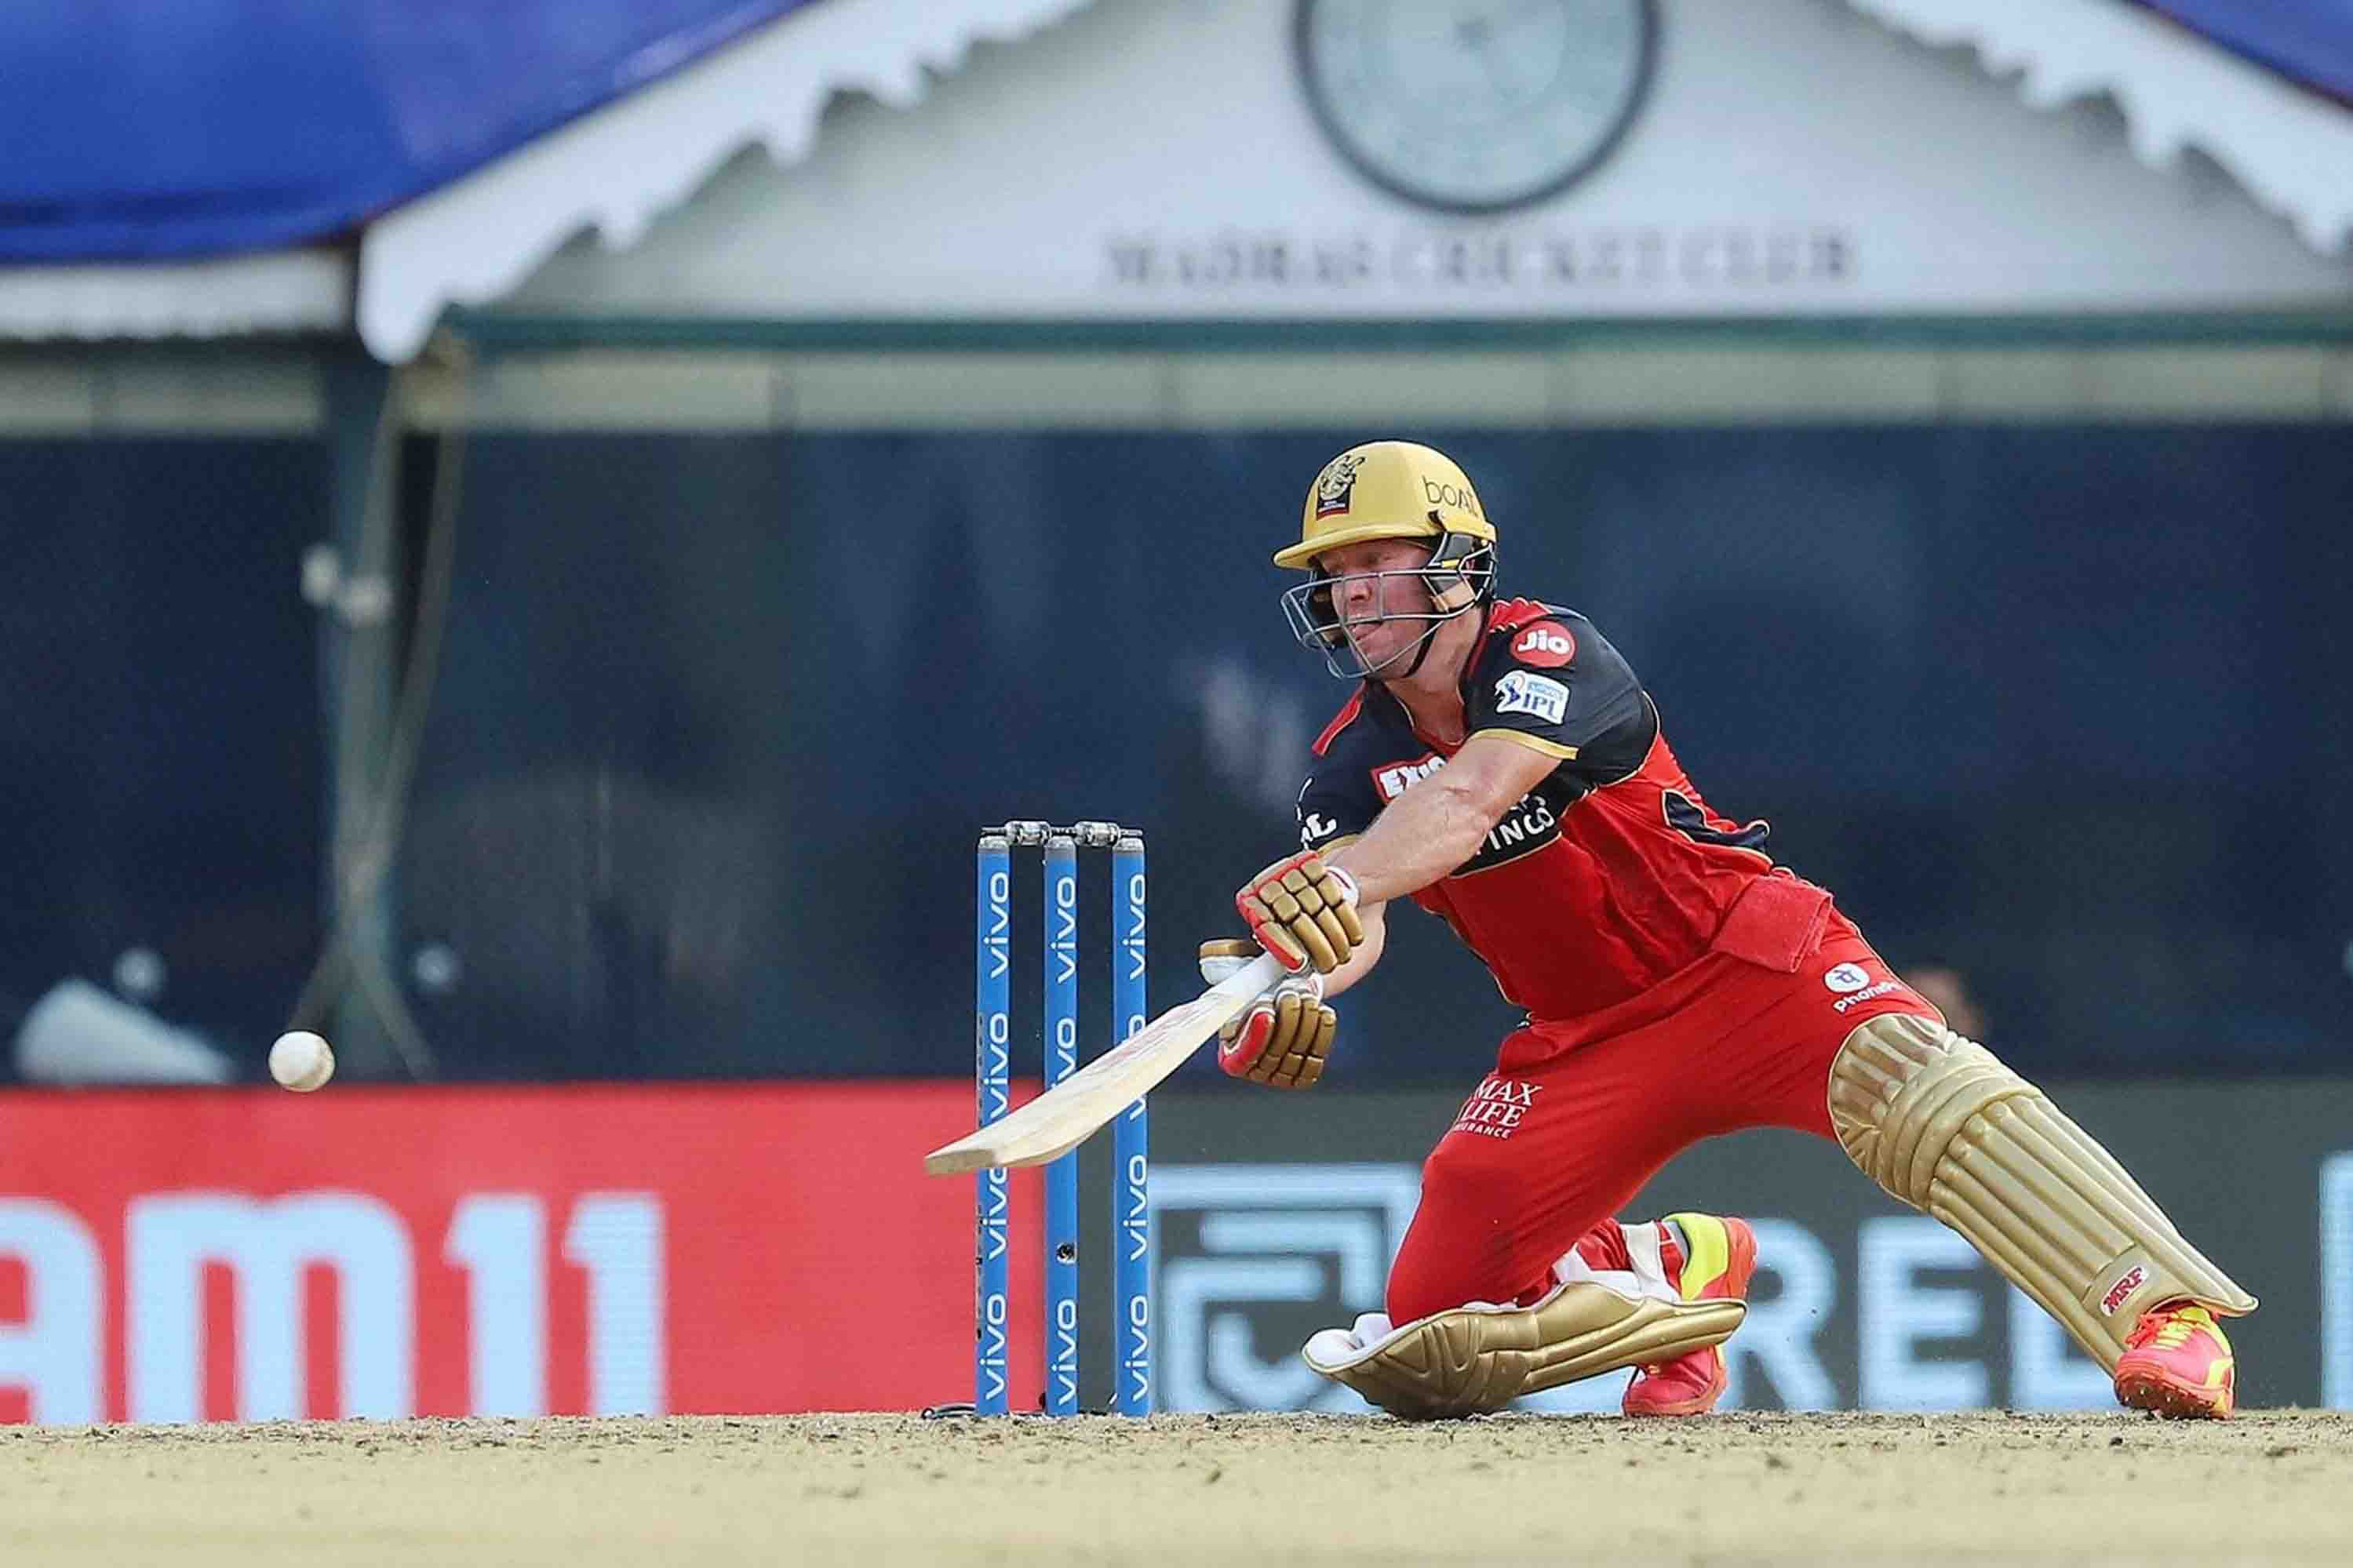 De Villiers says it will be "fantastic" to play for South Africa again